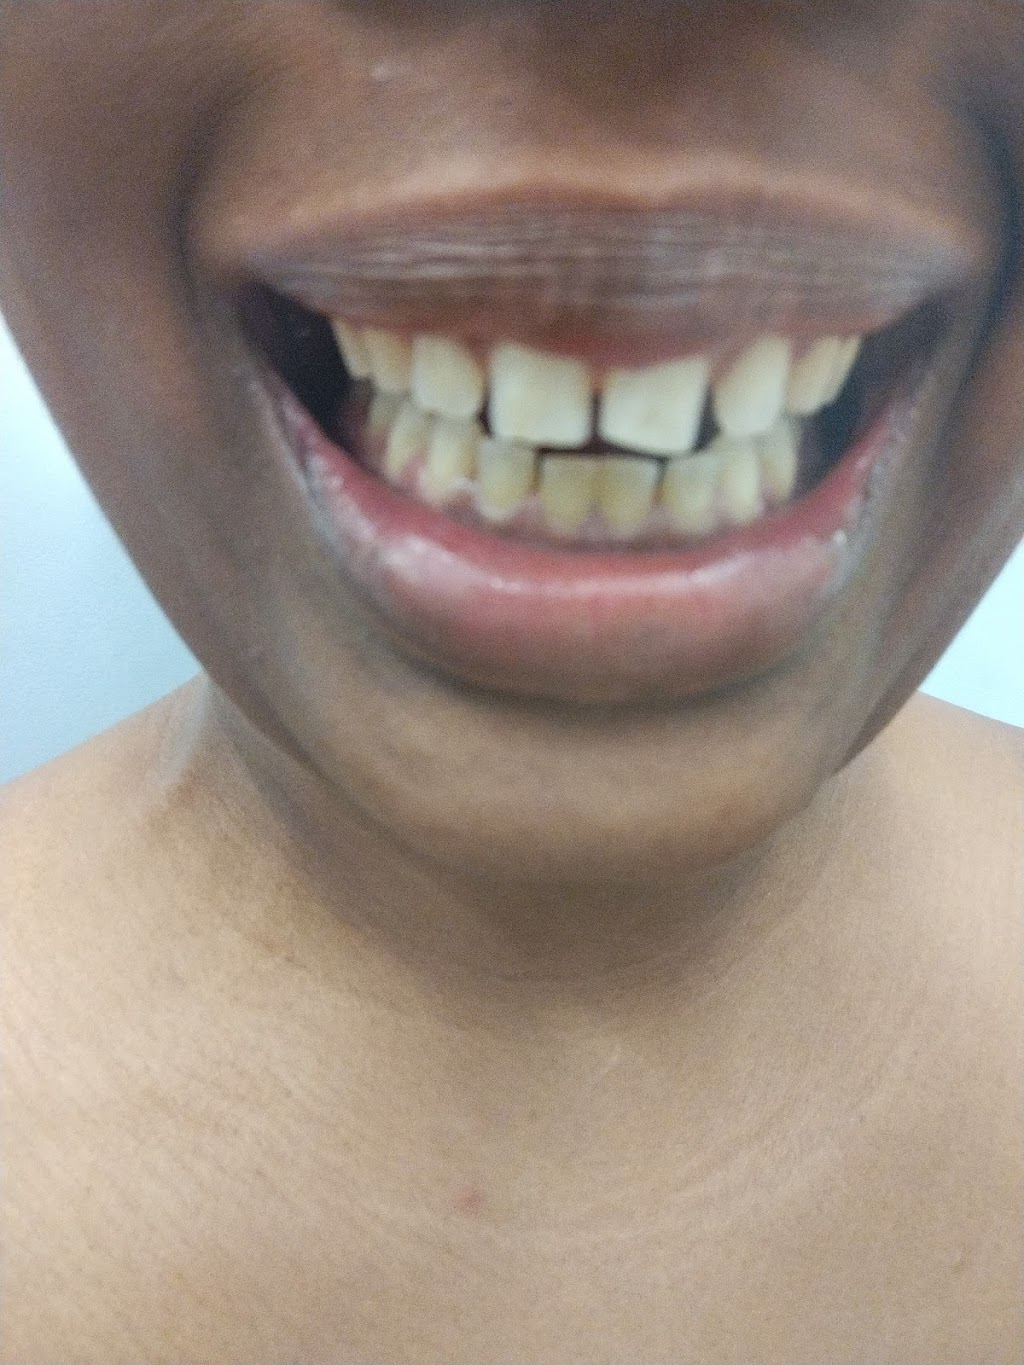 My Tooth Docs | 16240 Louis Ave, South Holland, IL 60473, USA | Phone: (708) 333-2909